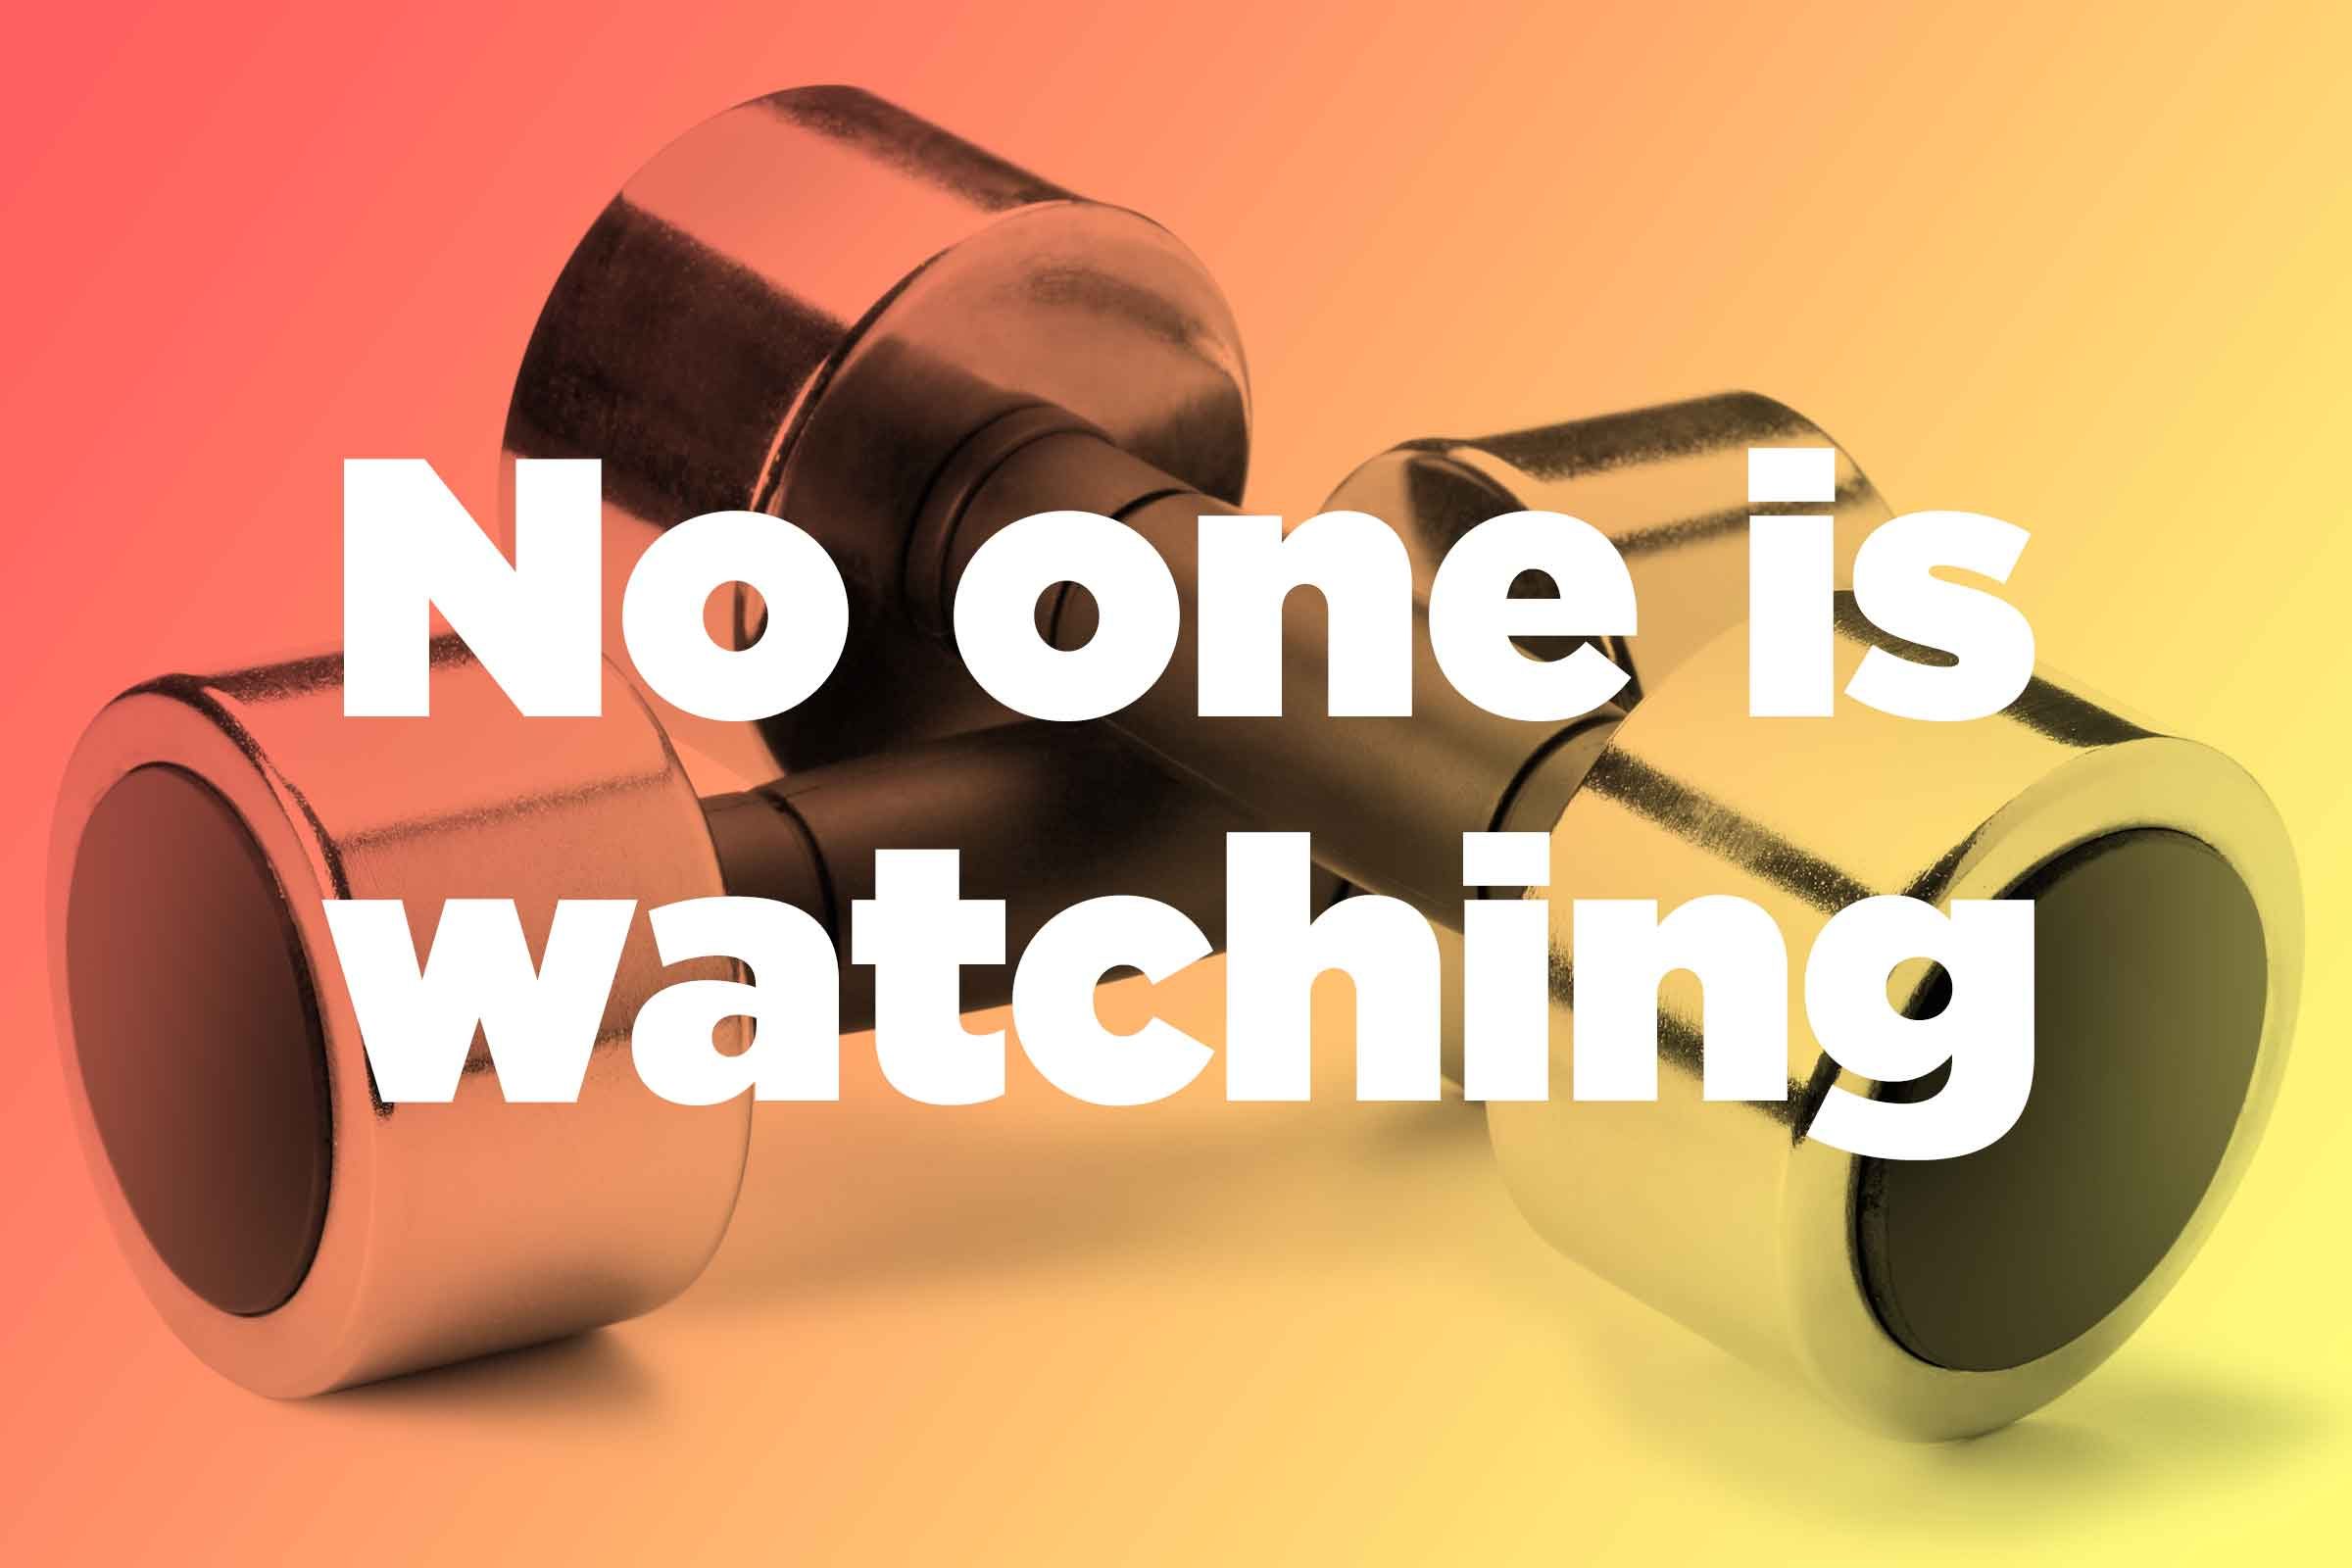 Believe this: No one is watching you